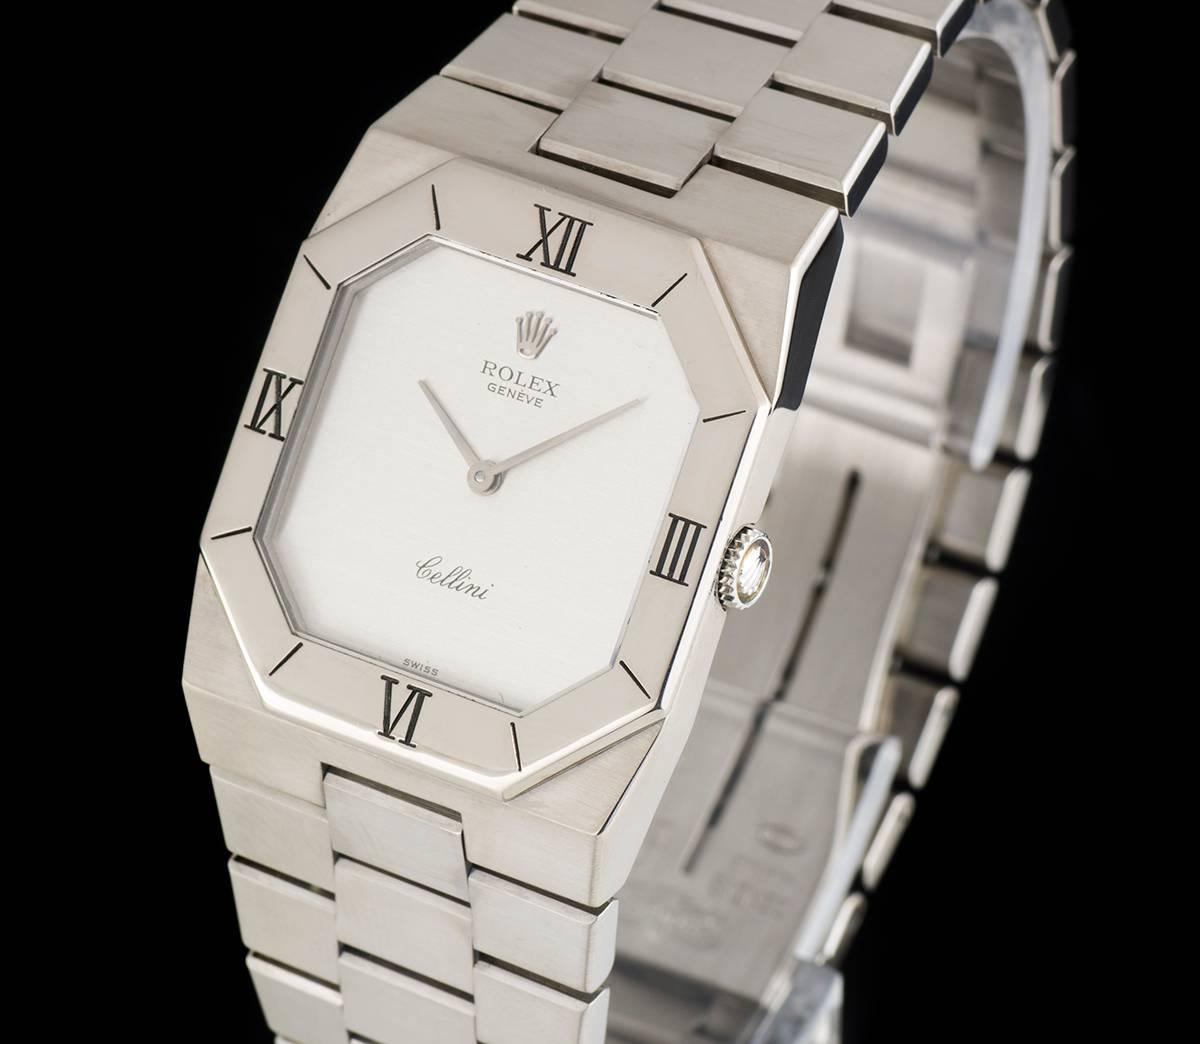 An 18k White Gold Vintage Cellini Gents Wristwatch, silver dial, a fixed 18k white gold bezel with engraved hour markers and engraved roman numerals at III, VI, IX and IX, an 18k white gold oysterquartz bracelet with a concealed 18k white gold